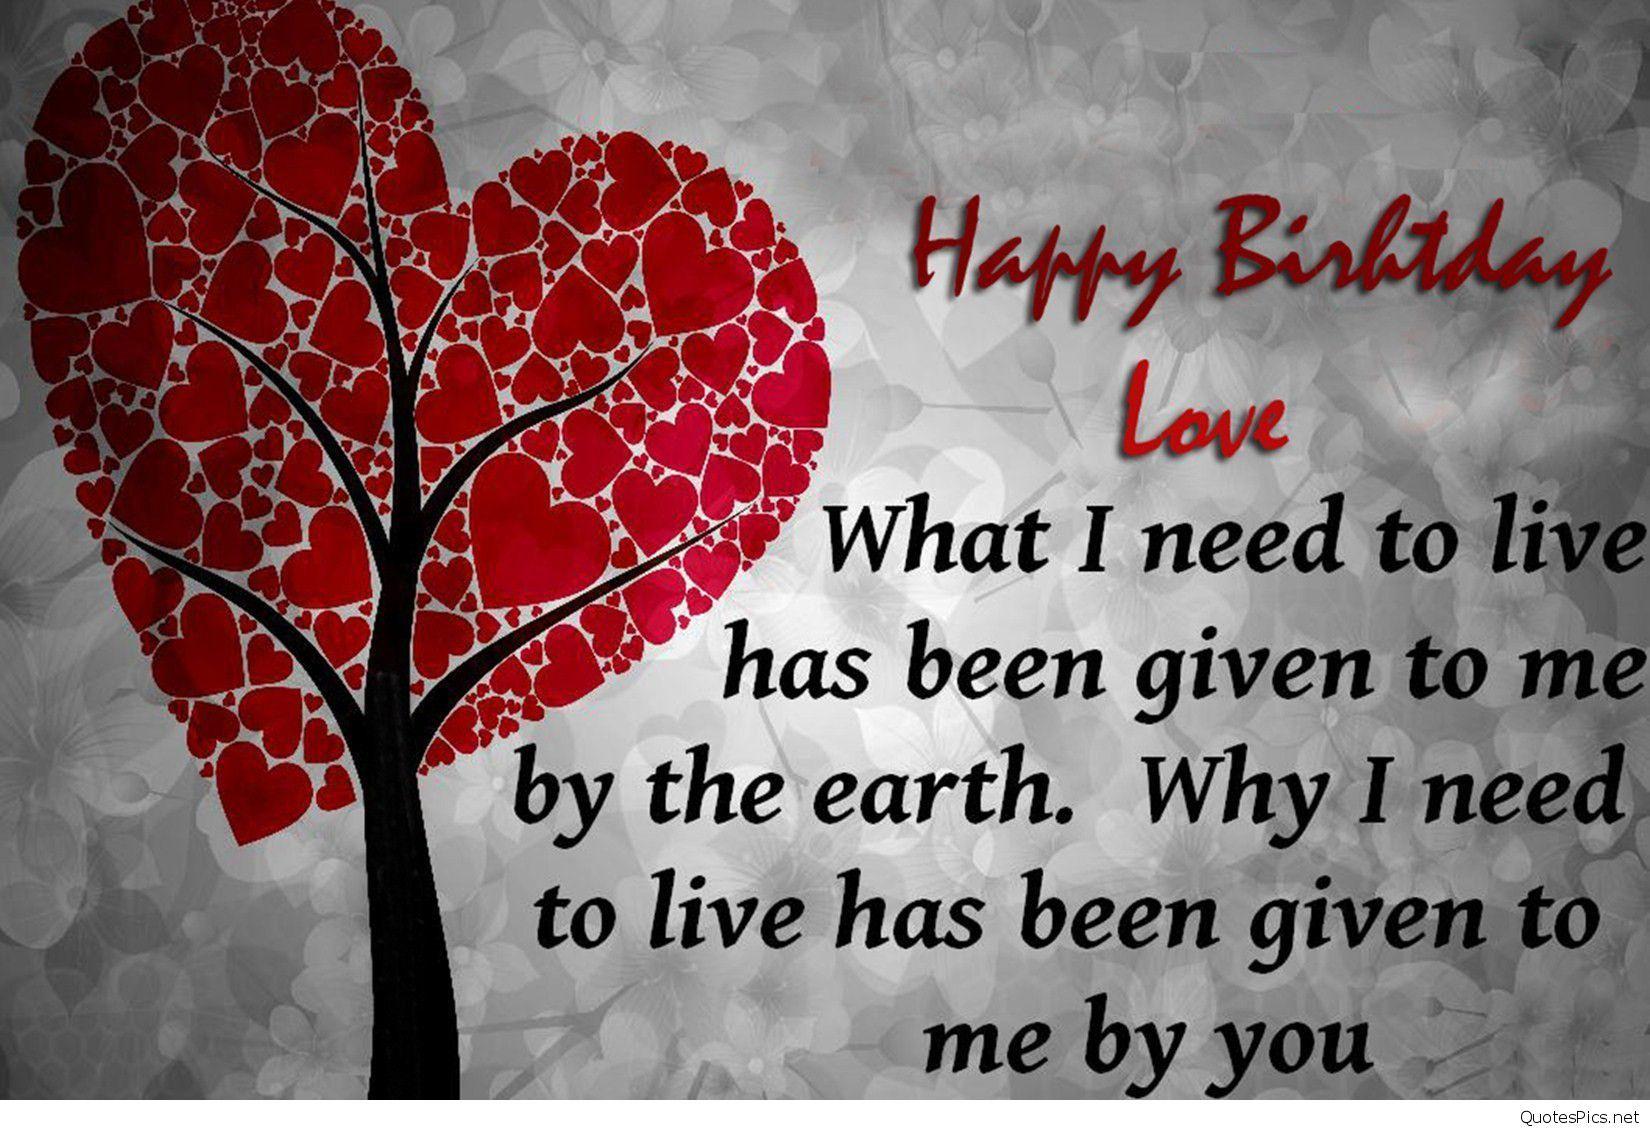 Love happy birthday wishes, cards, sayings